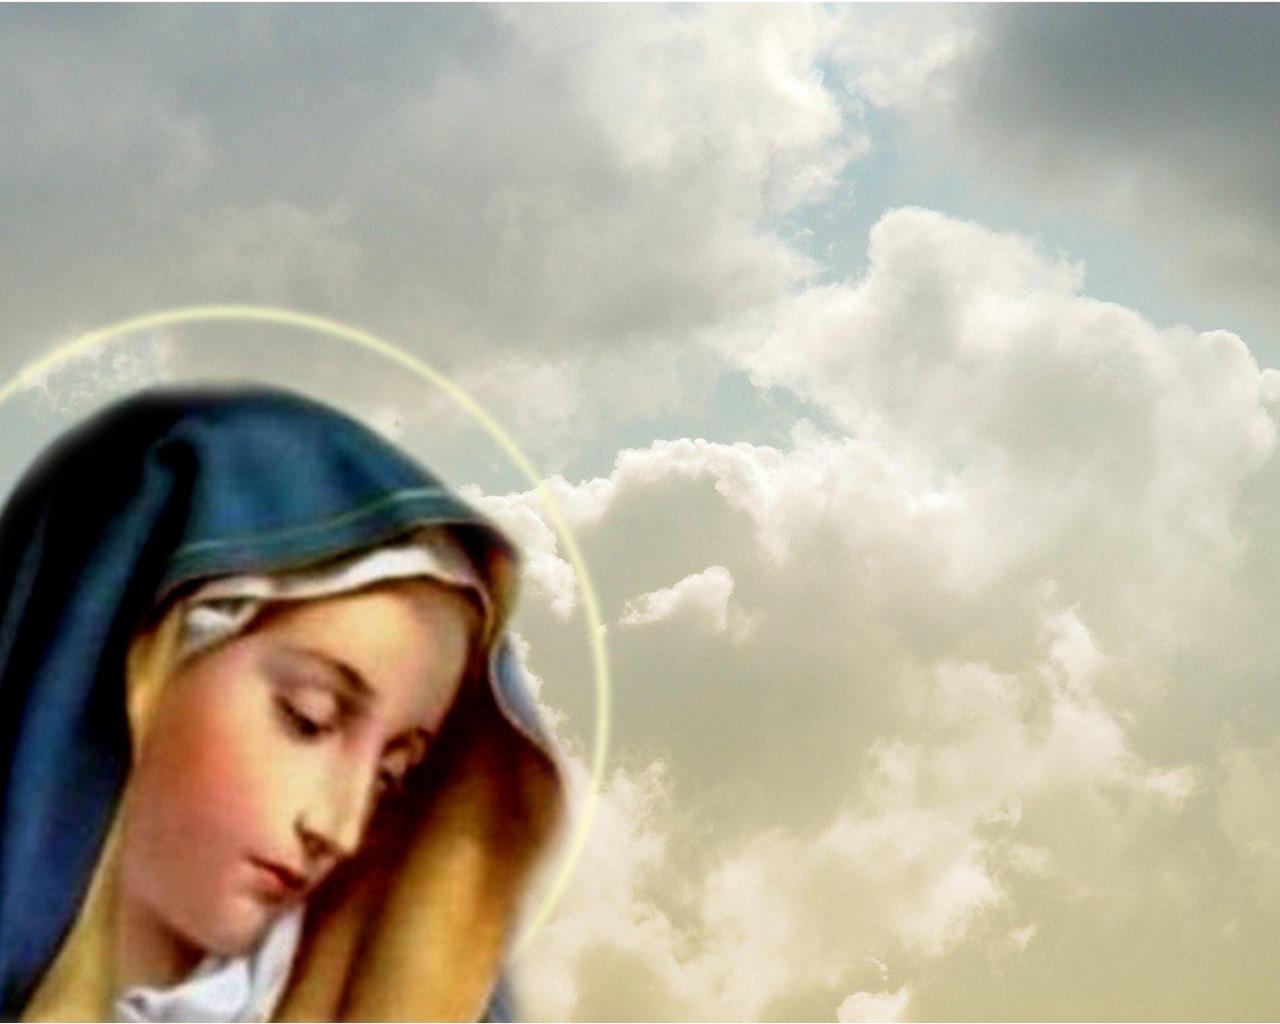 Virgin Mary High Quality And Resolution Wallpaper On